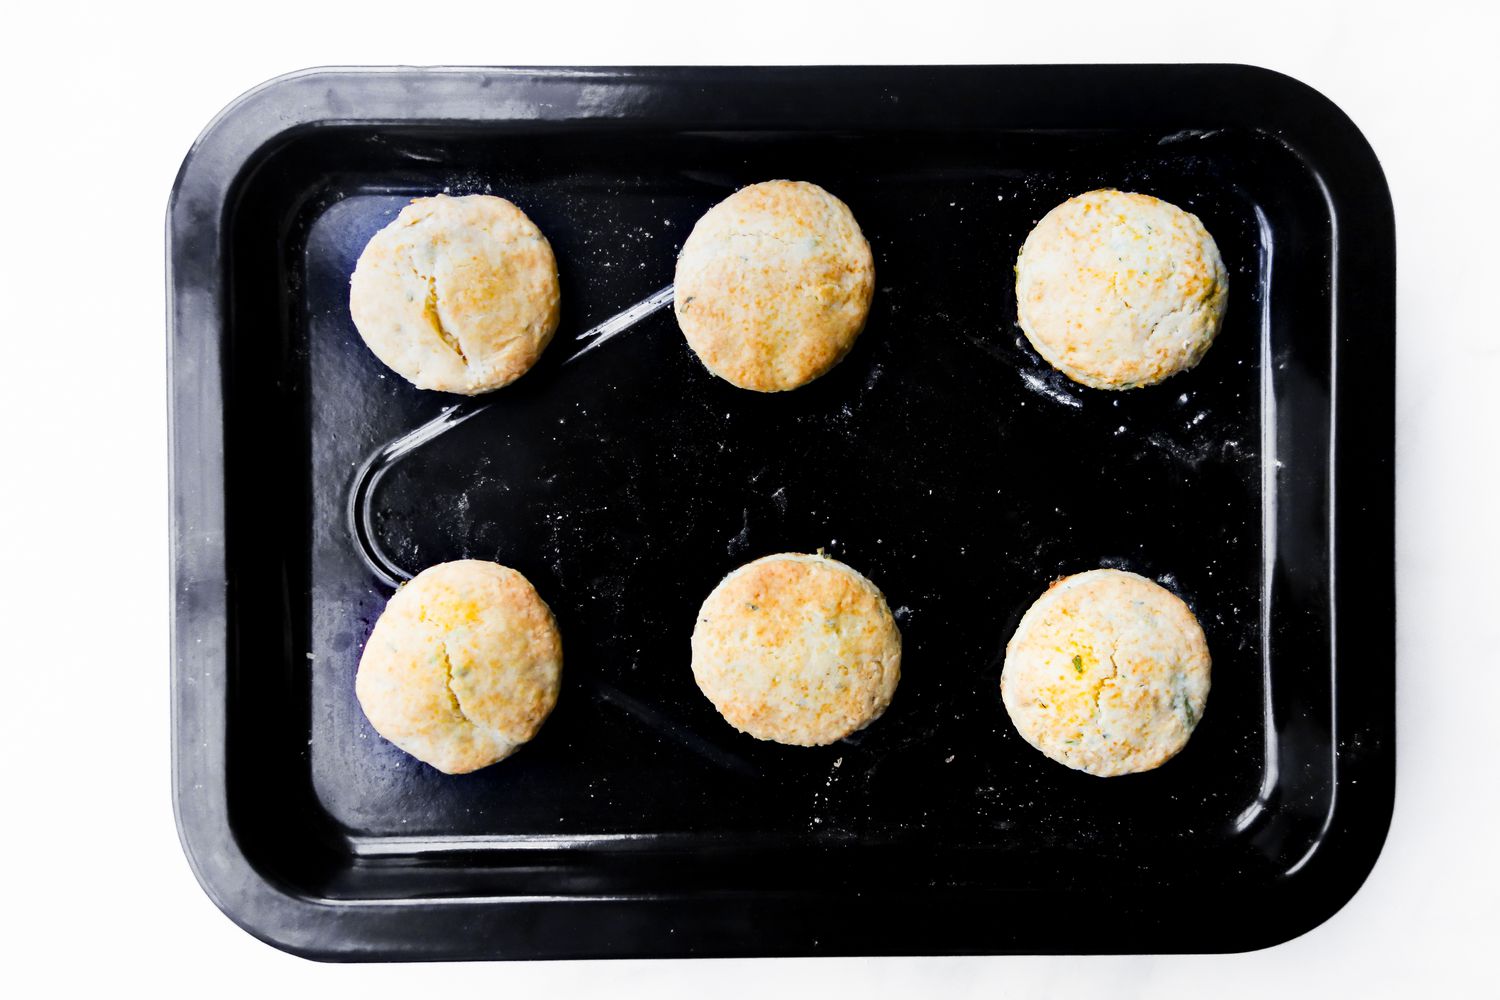 Six baked biscuits on a black sheet pan.